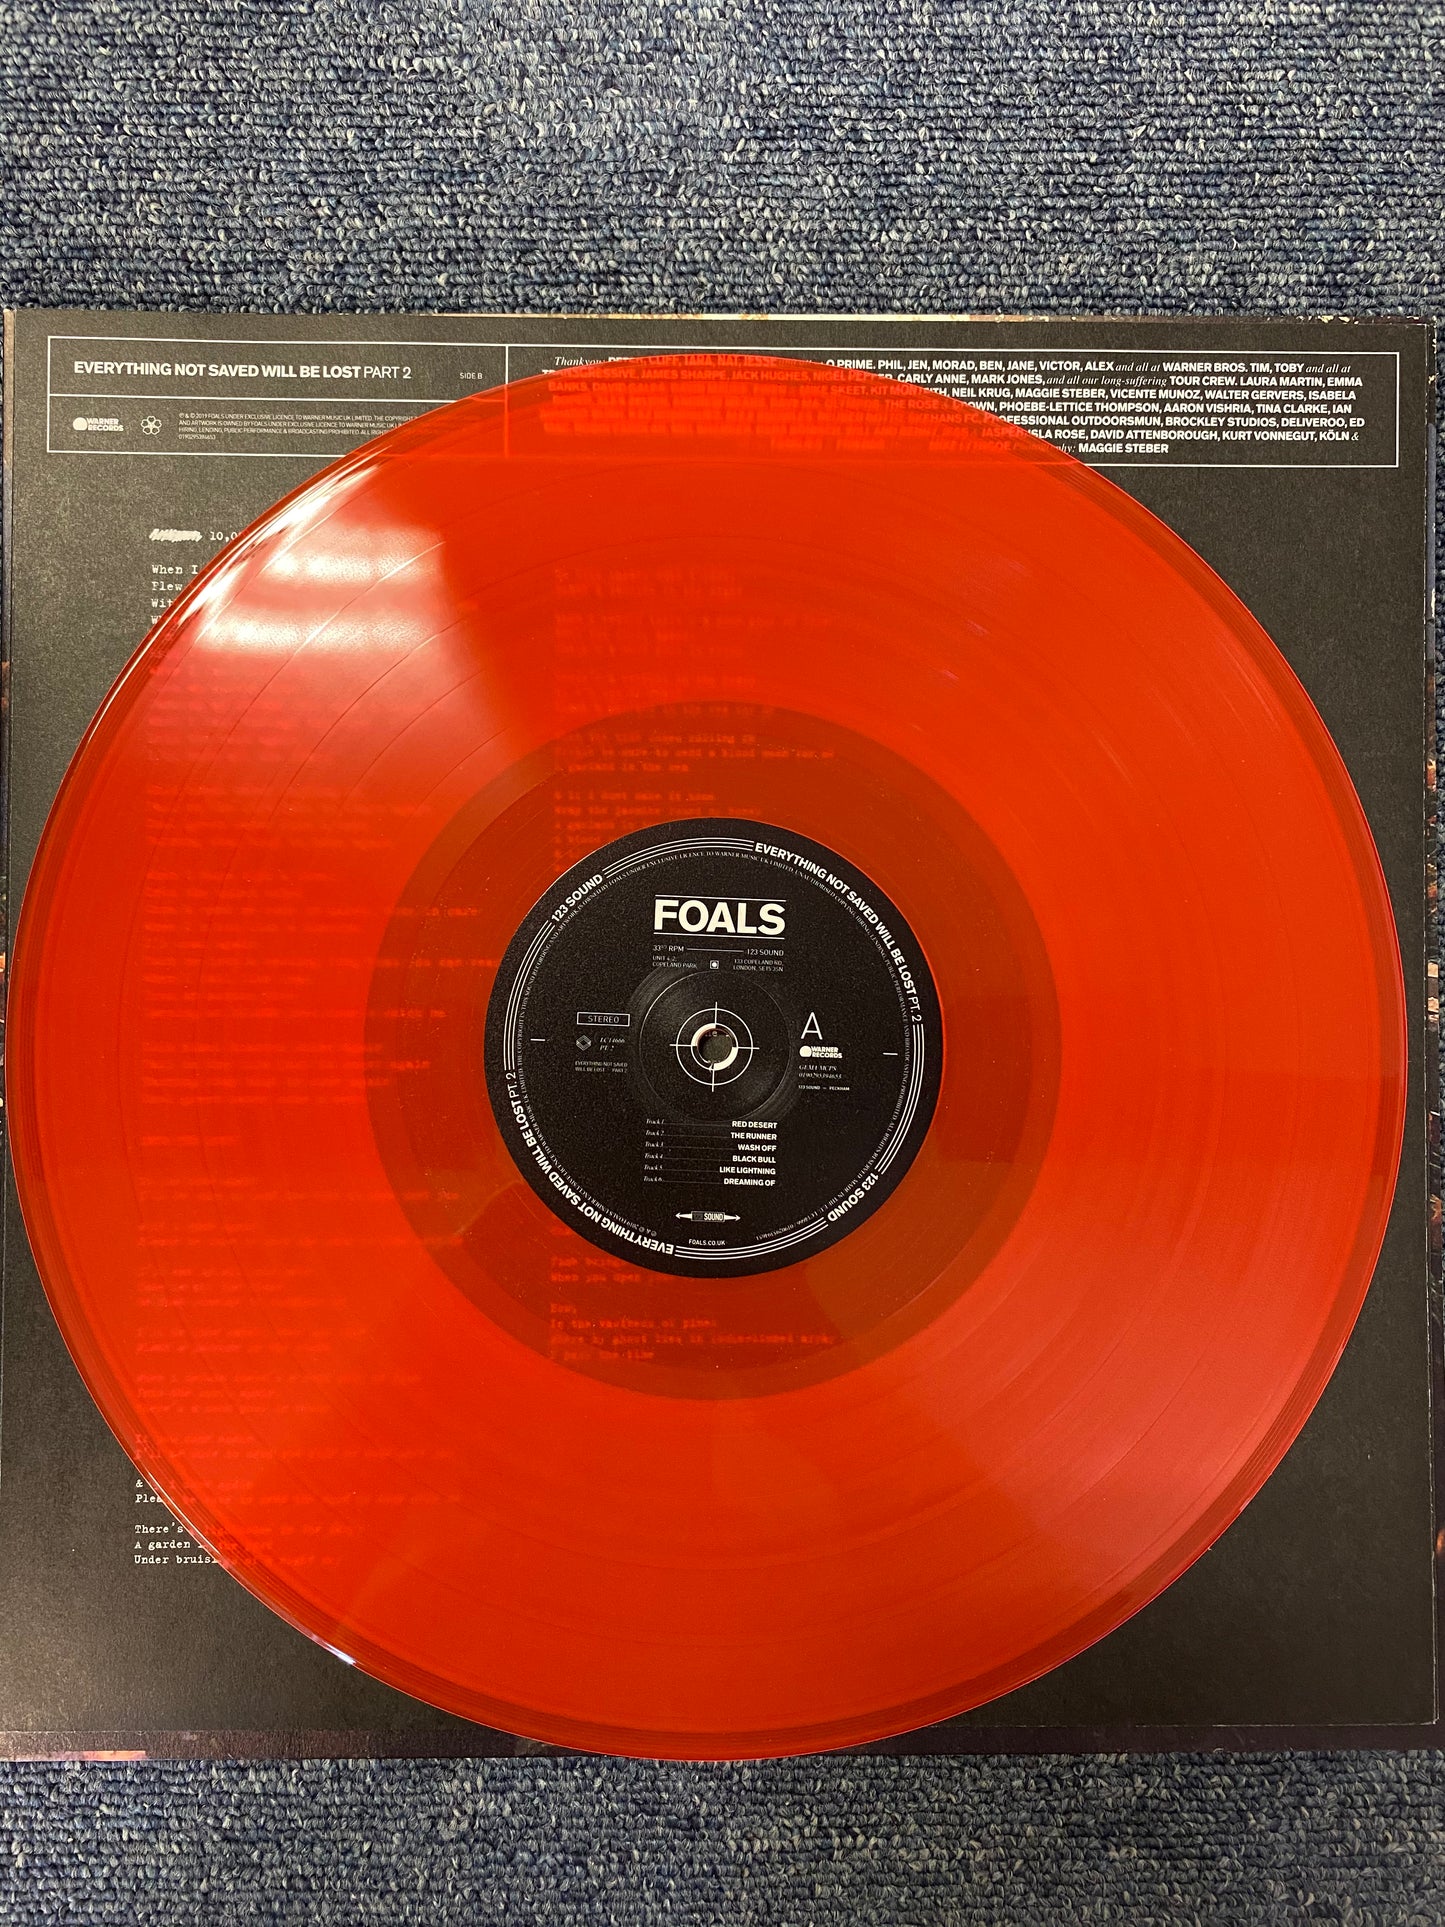 FOALS: EVERYTHING NOT SAVED WILL BE LOST PART2 1LP ORANGE VINYL (18.10.19)